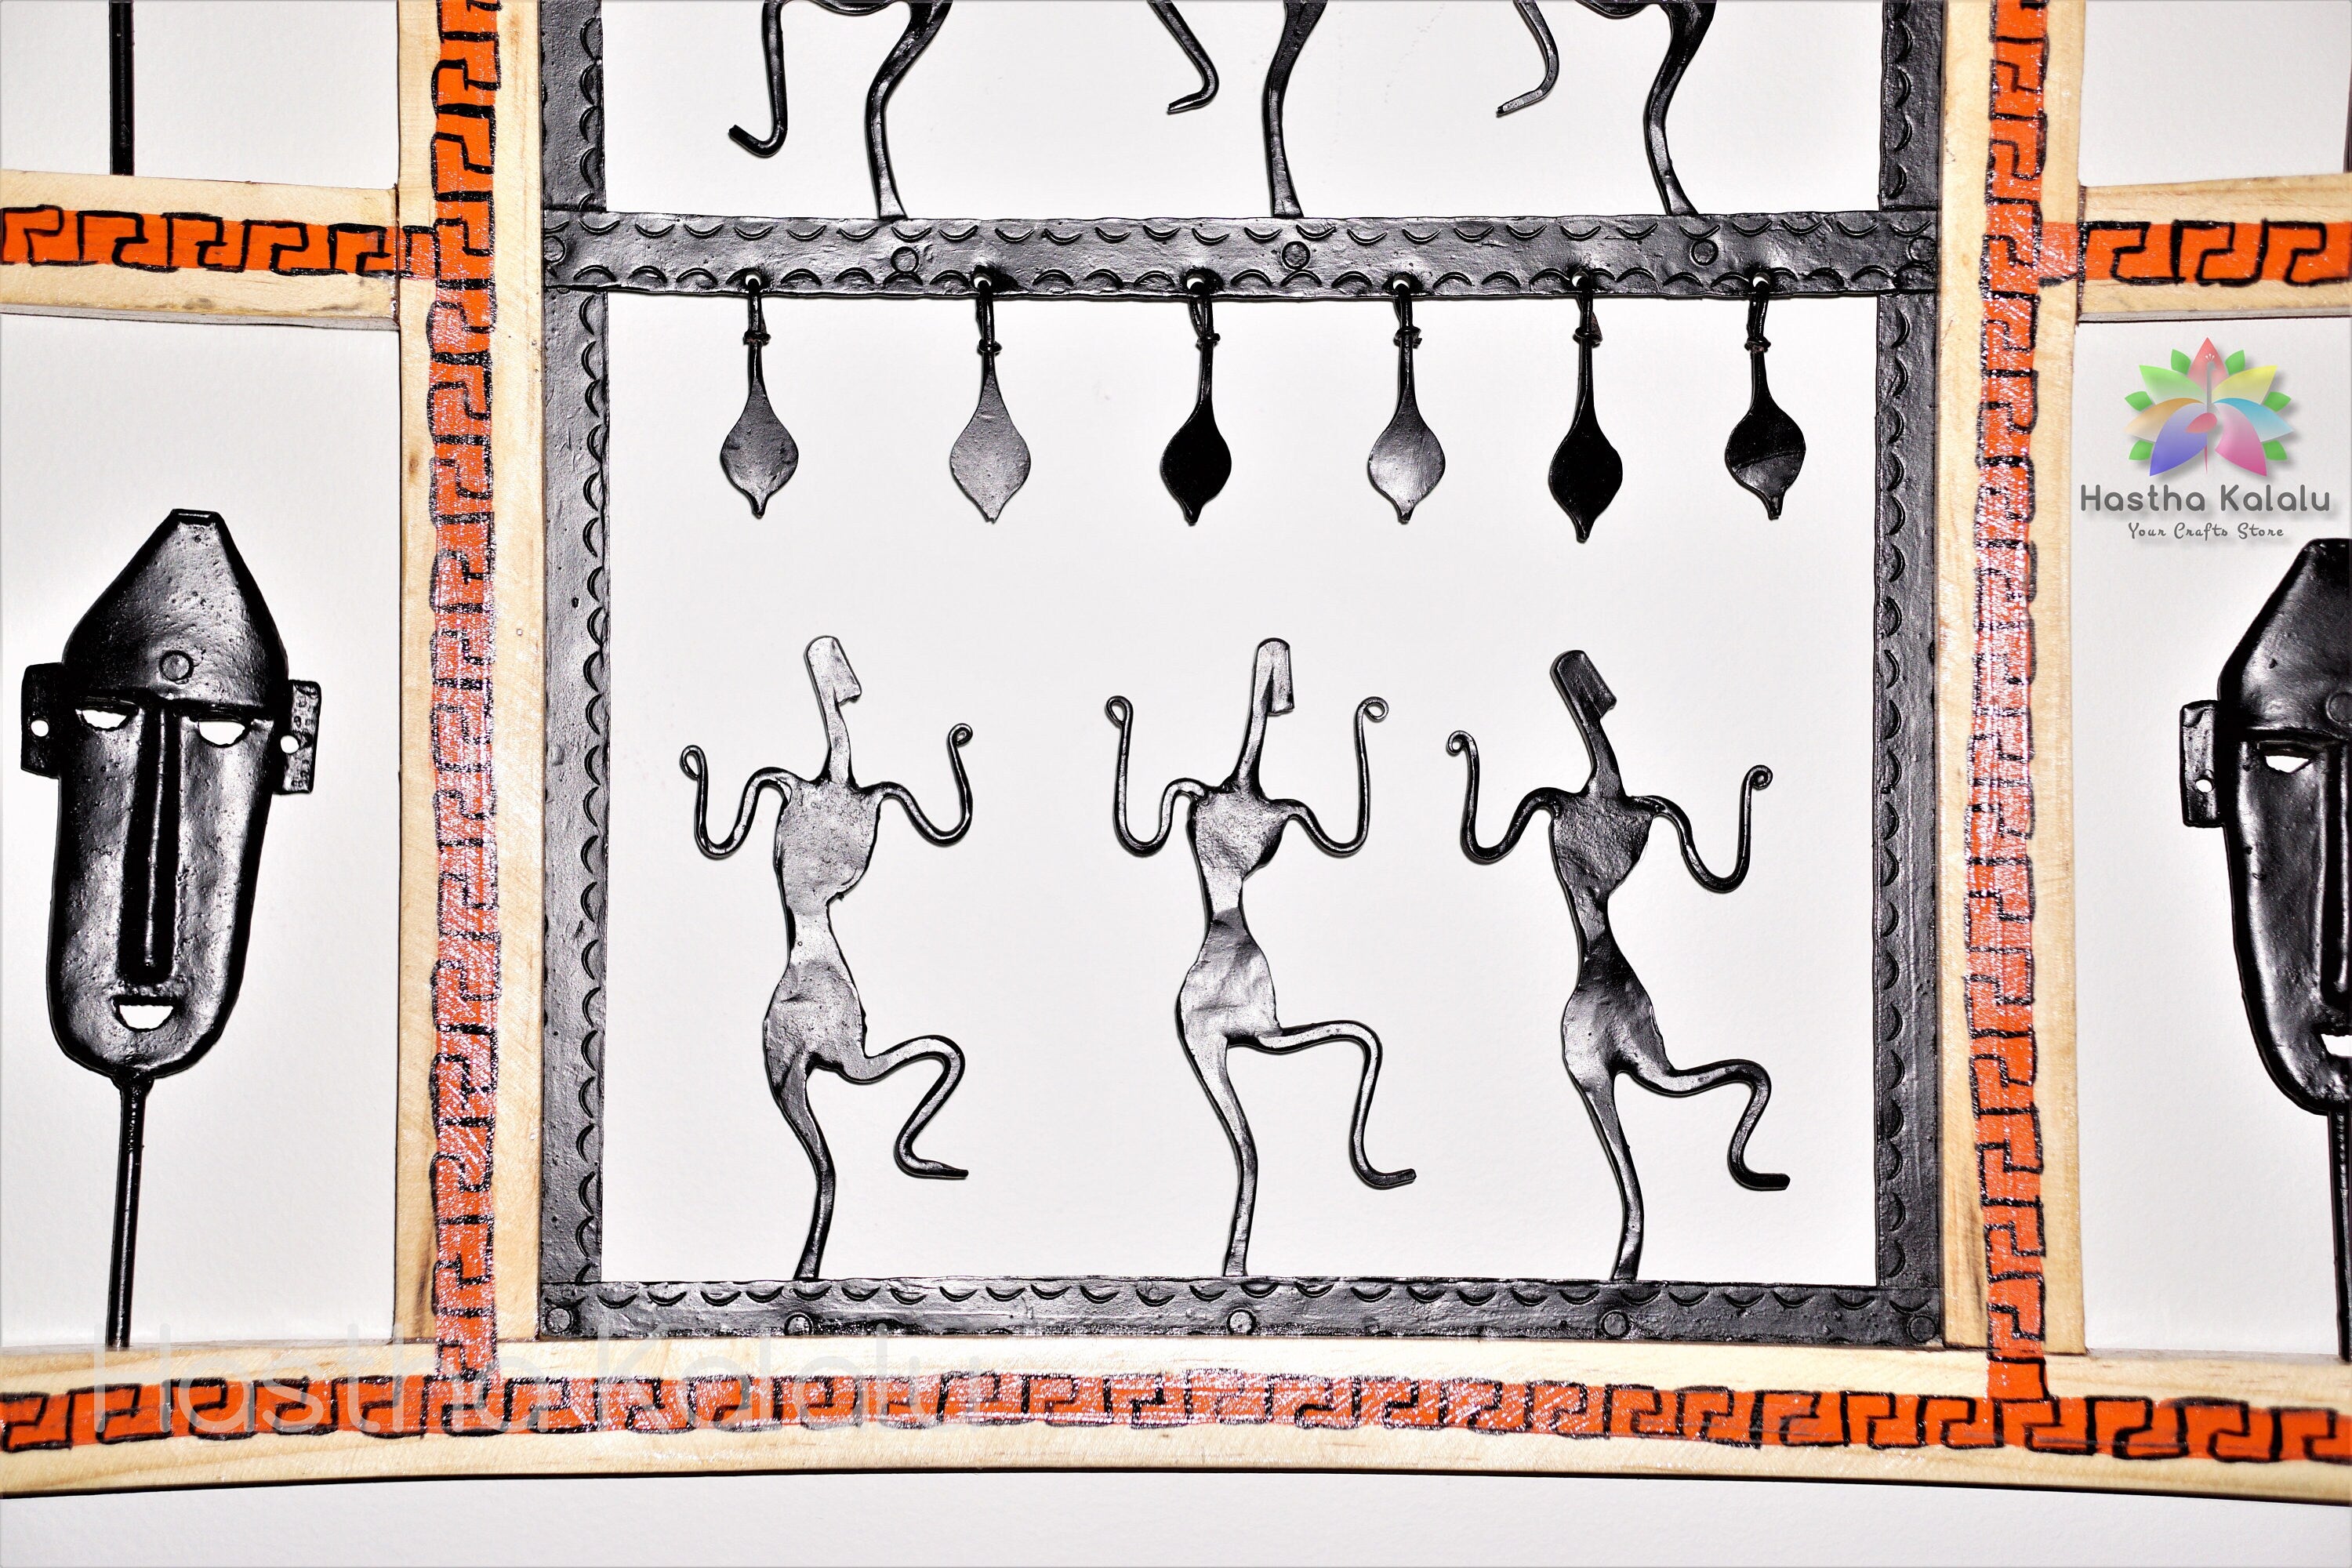 Wrought Iron made ventilation grill depicting tribal people in folk art